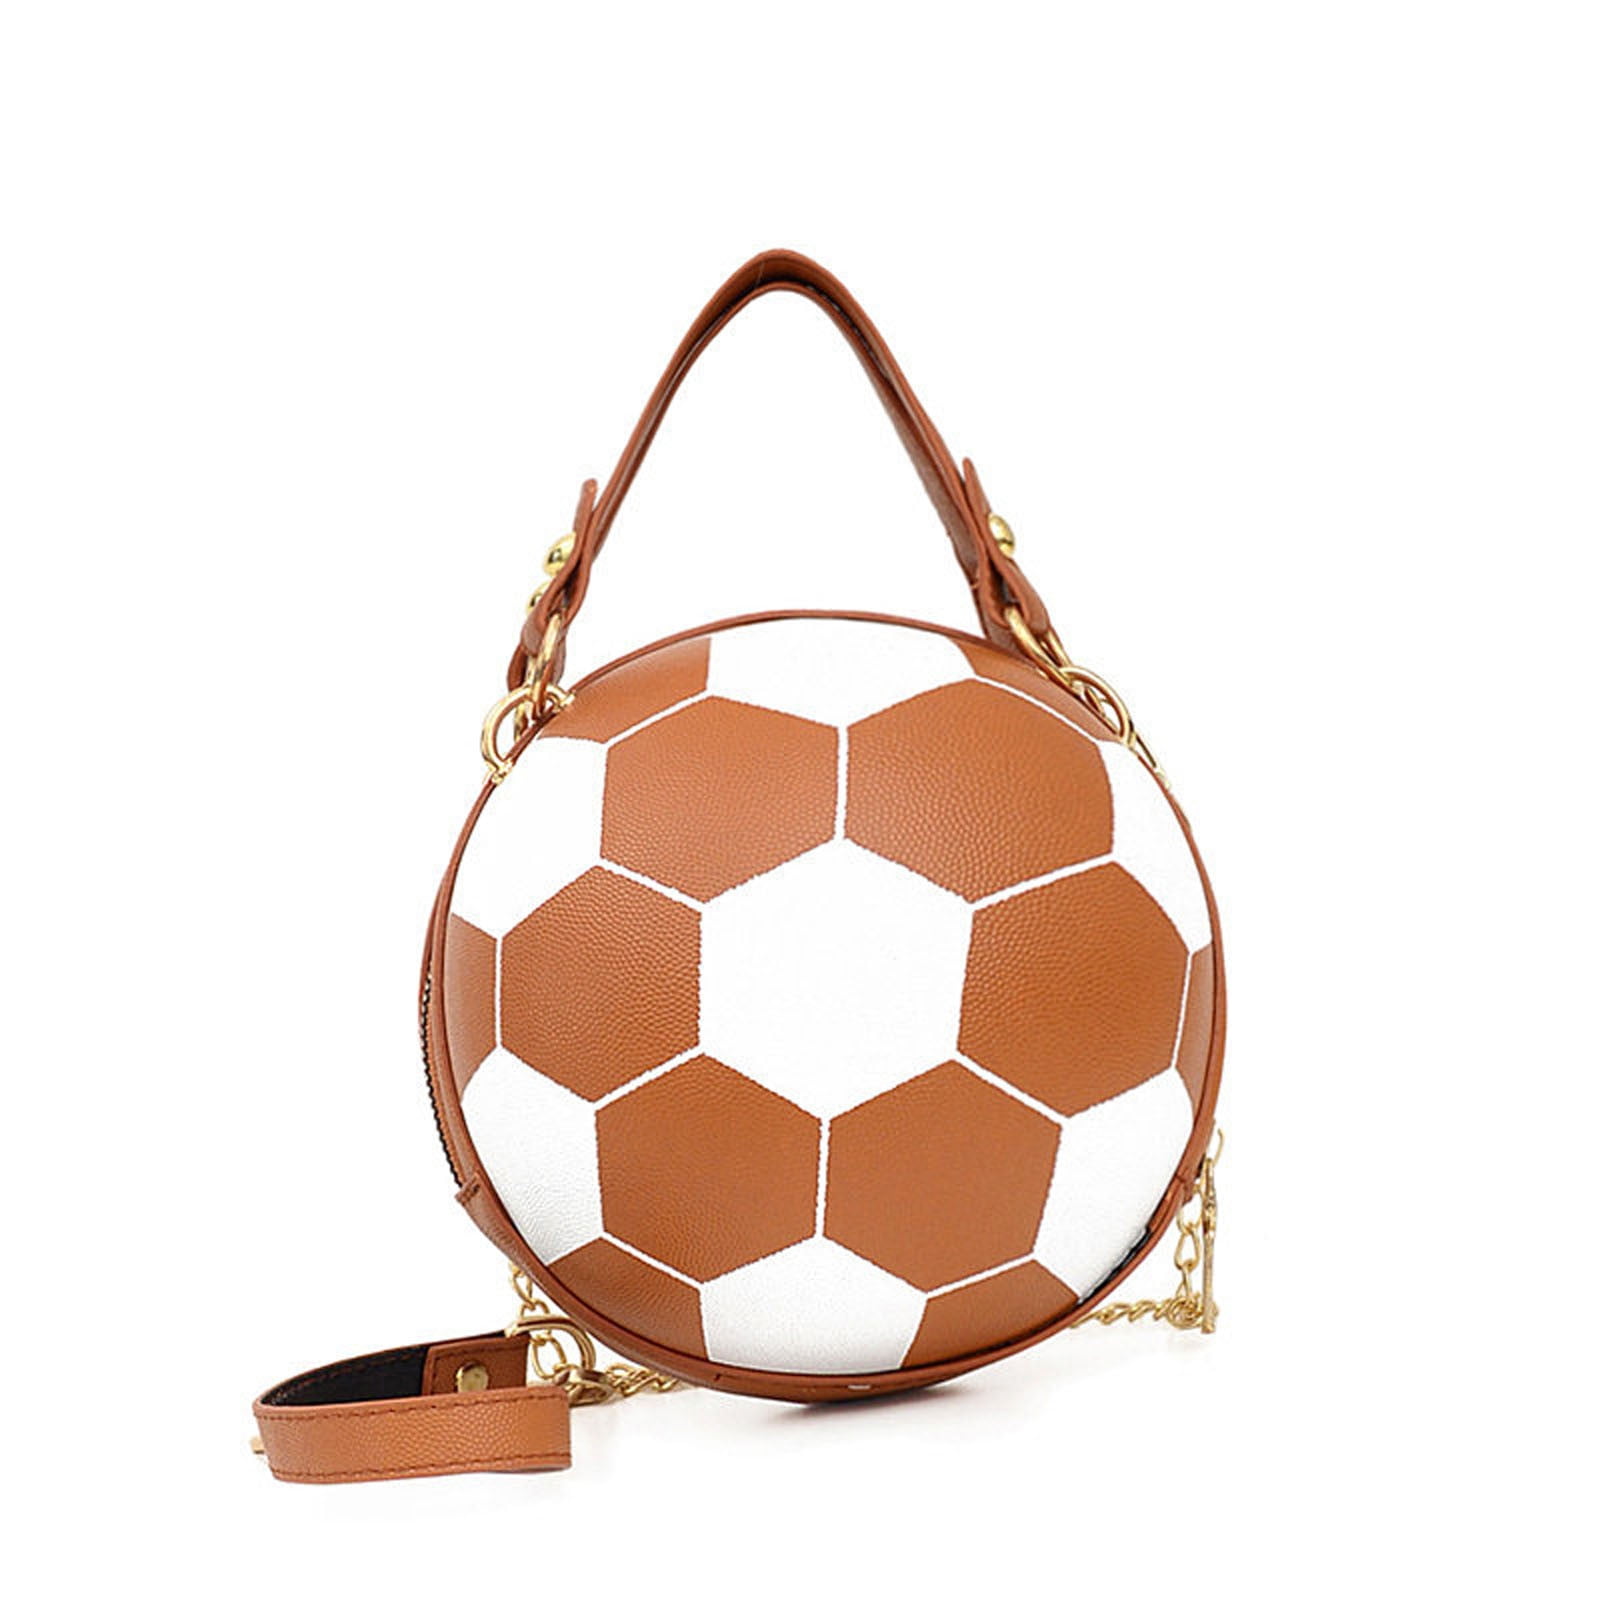 Eqwljwe Unique Football Shaped Cross Body Bag Round Handbag PU Leather Messenger Shoulder Bag Personality Purses for Women World Cup Clearance, Adult